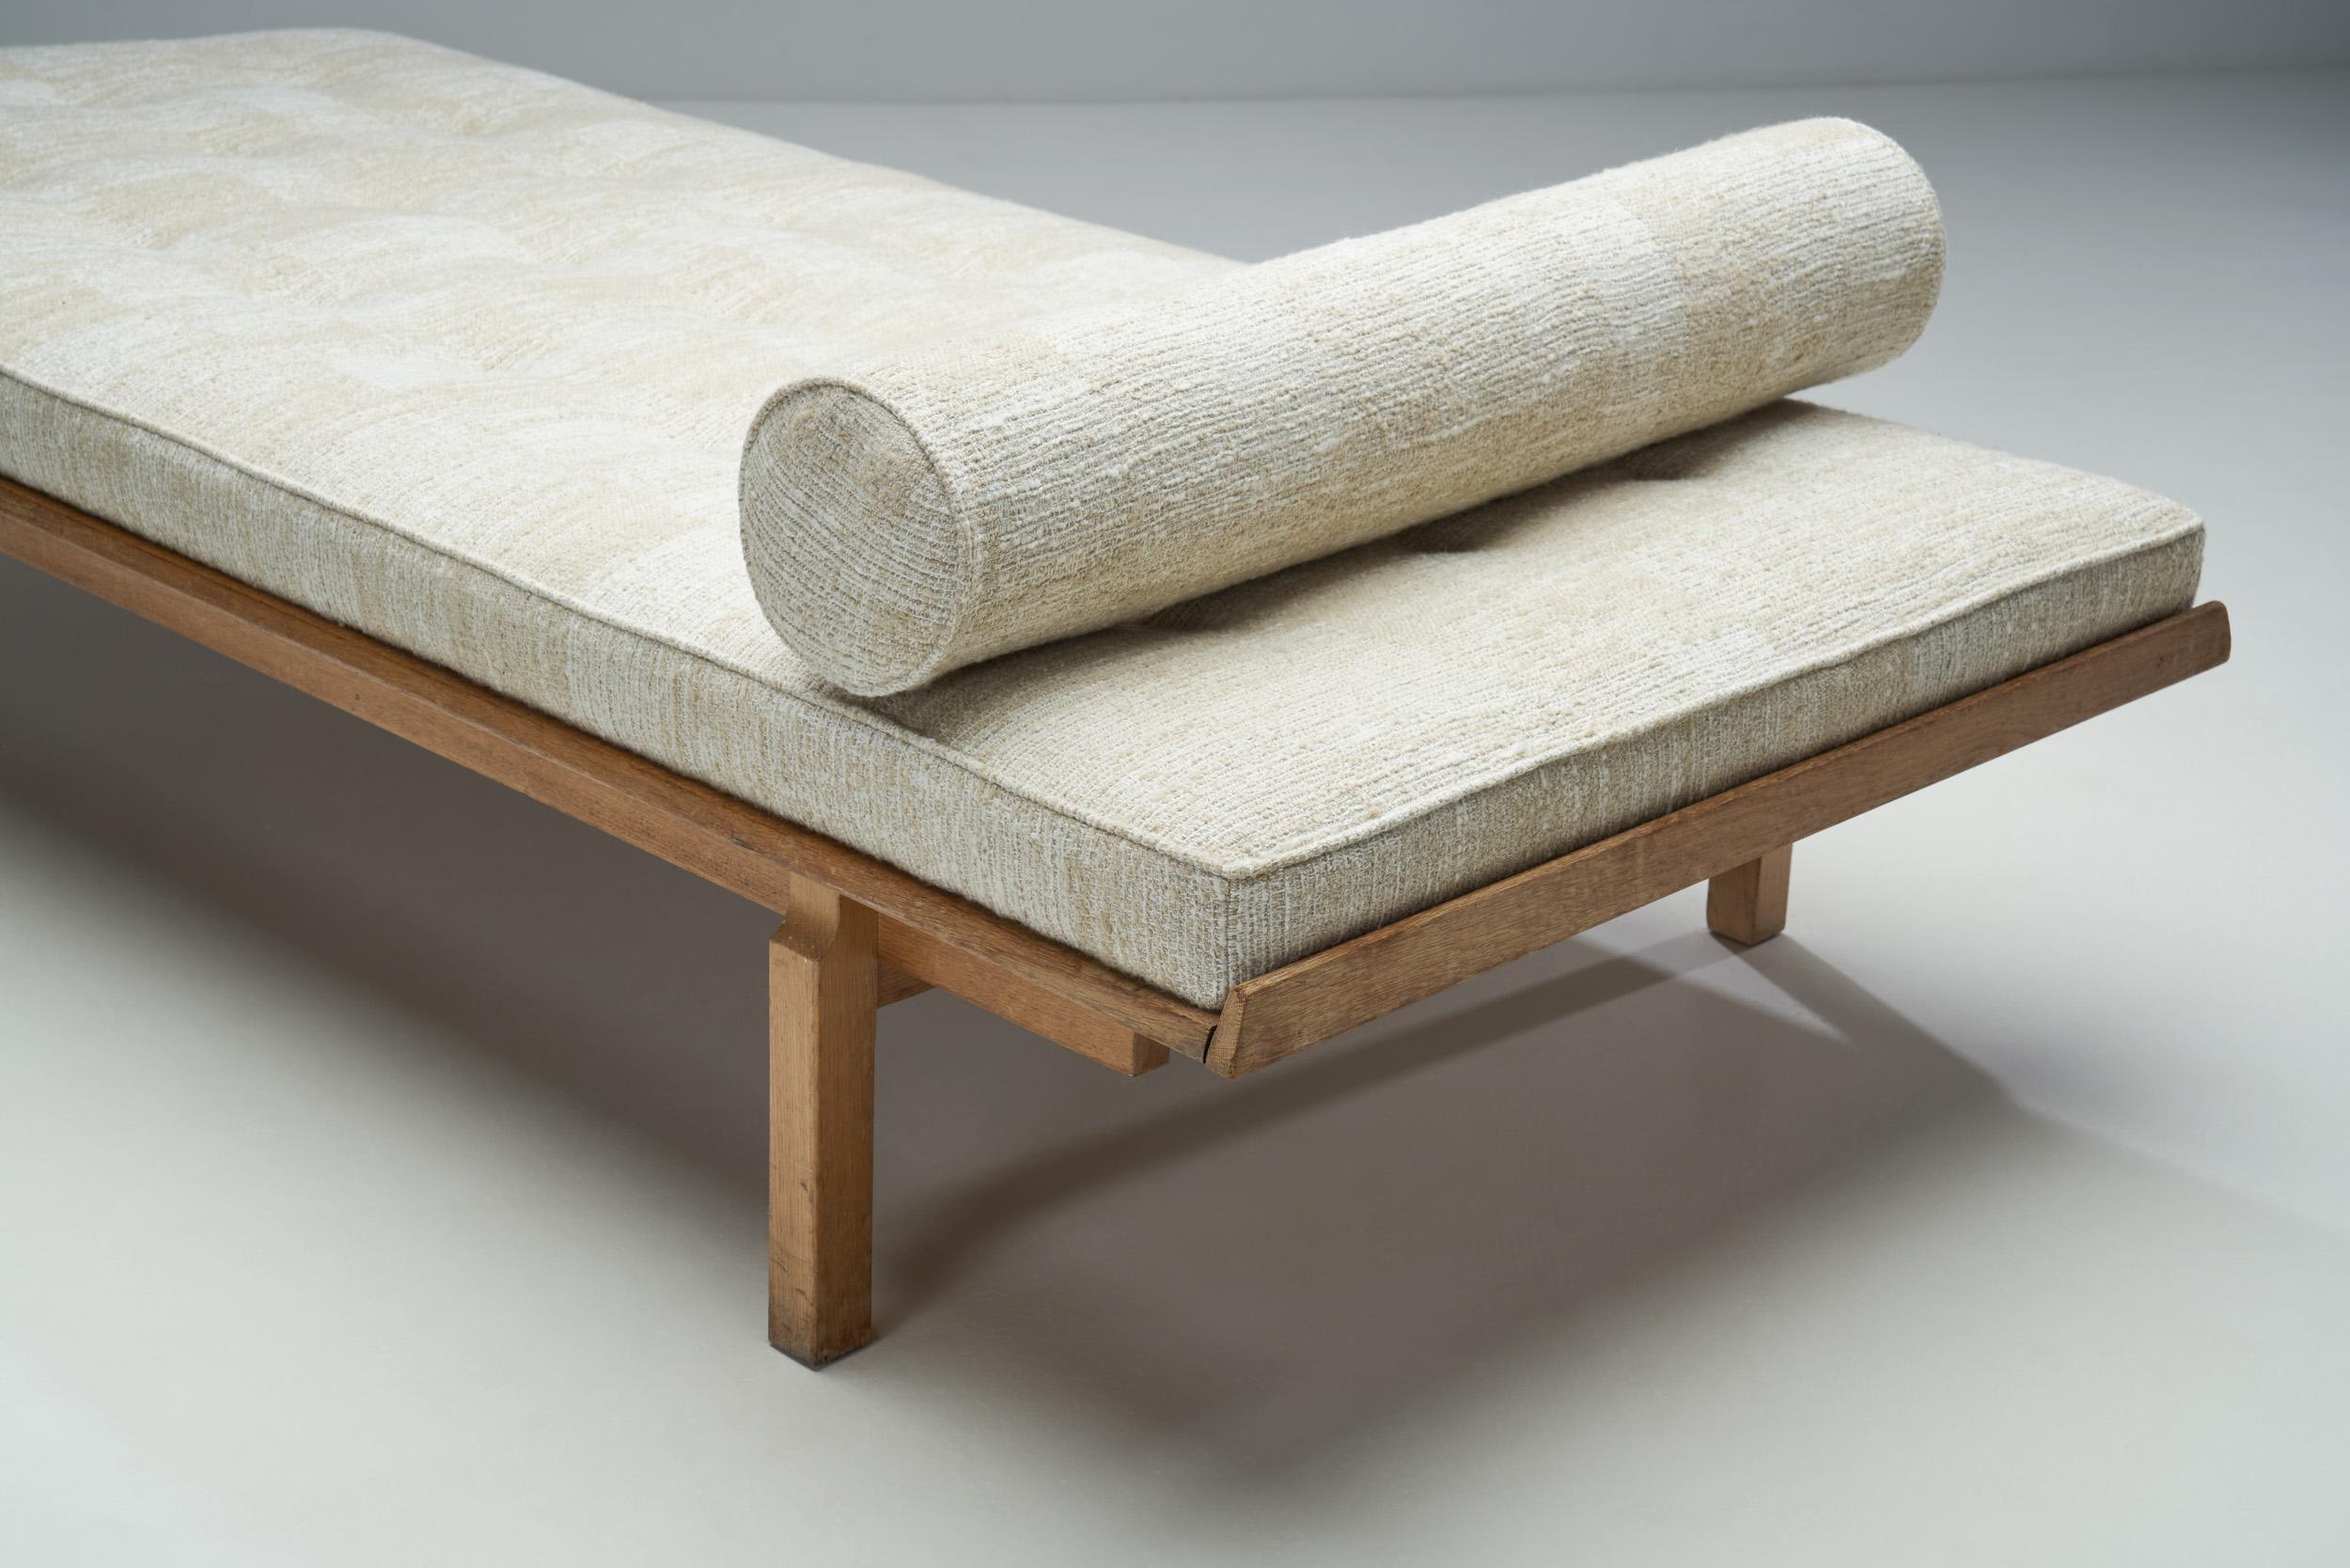 Danish Oak Daybed with Upholstered Mattress and Pillow, Denmark, ca 1950s For Sale 3